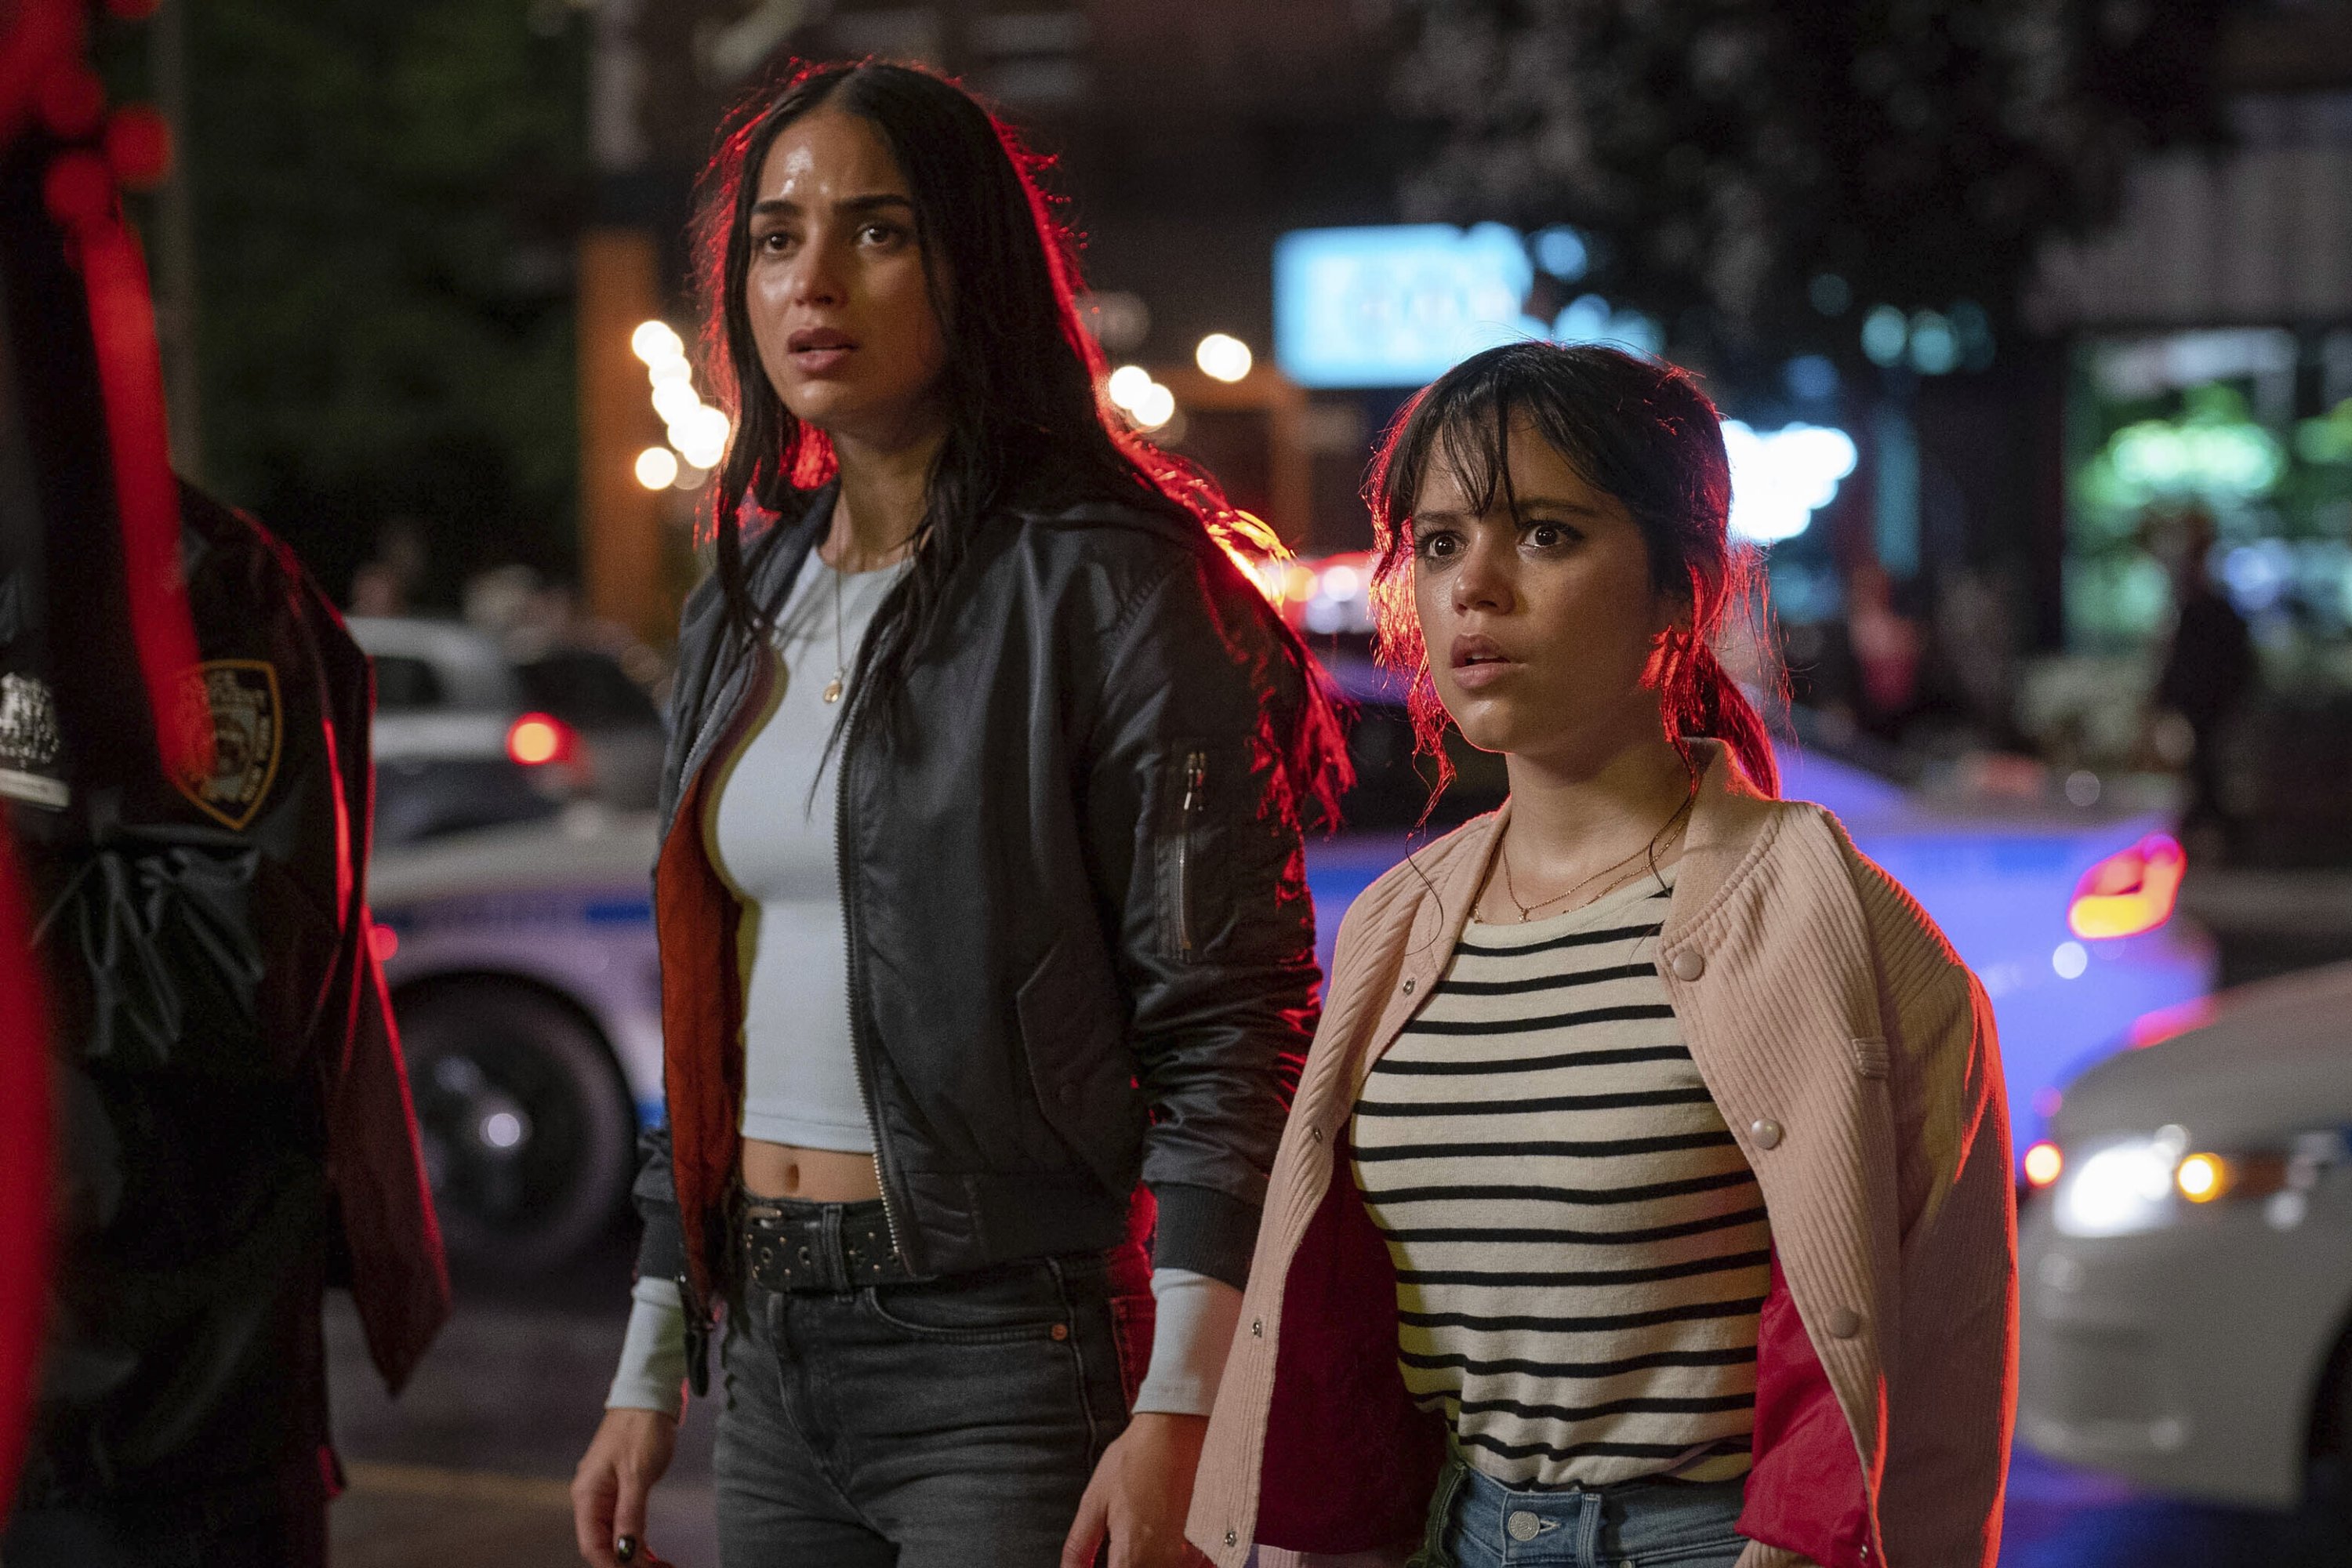 This image released by Paramount Pictures shows Melissa Barrera (L) and Jenna Ortega in a scene from "Scream VI." (AP Photo)